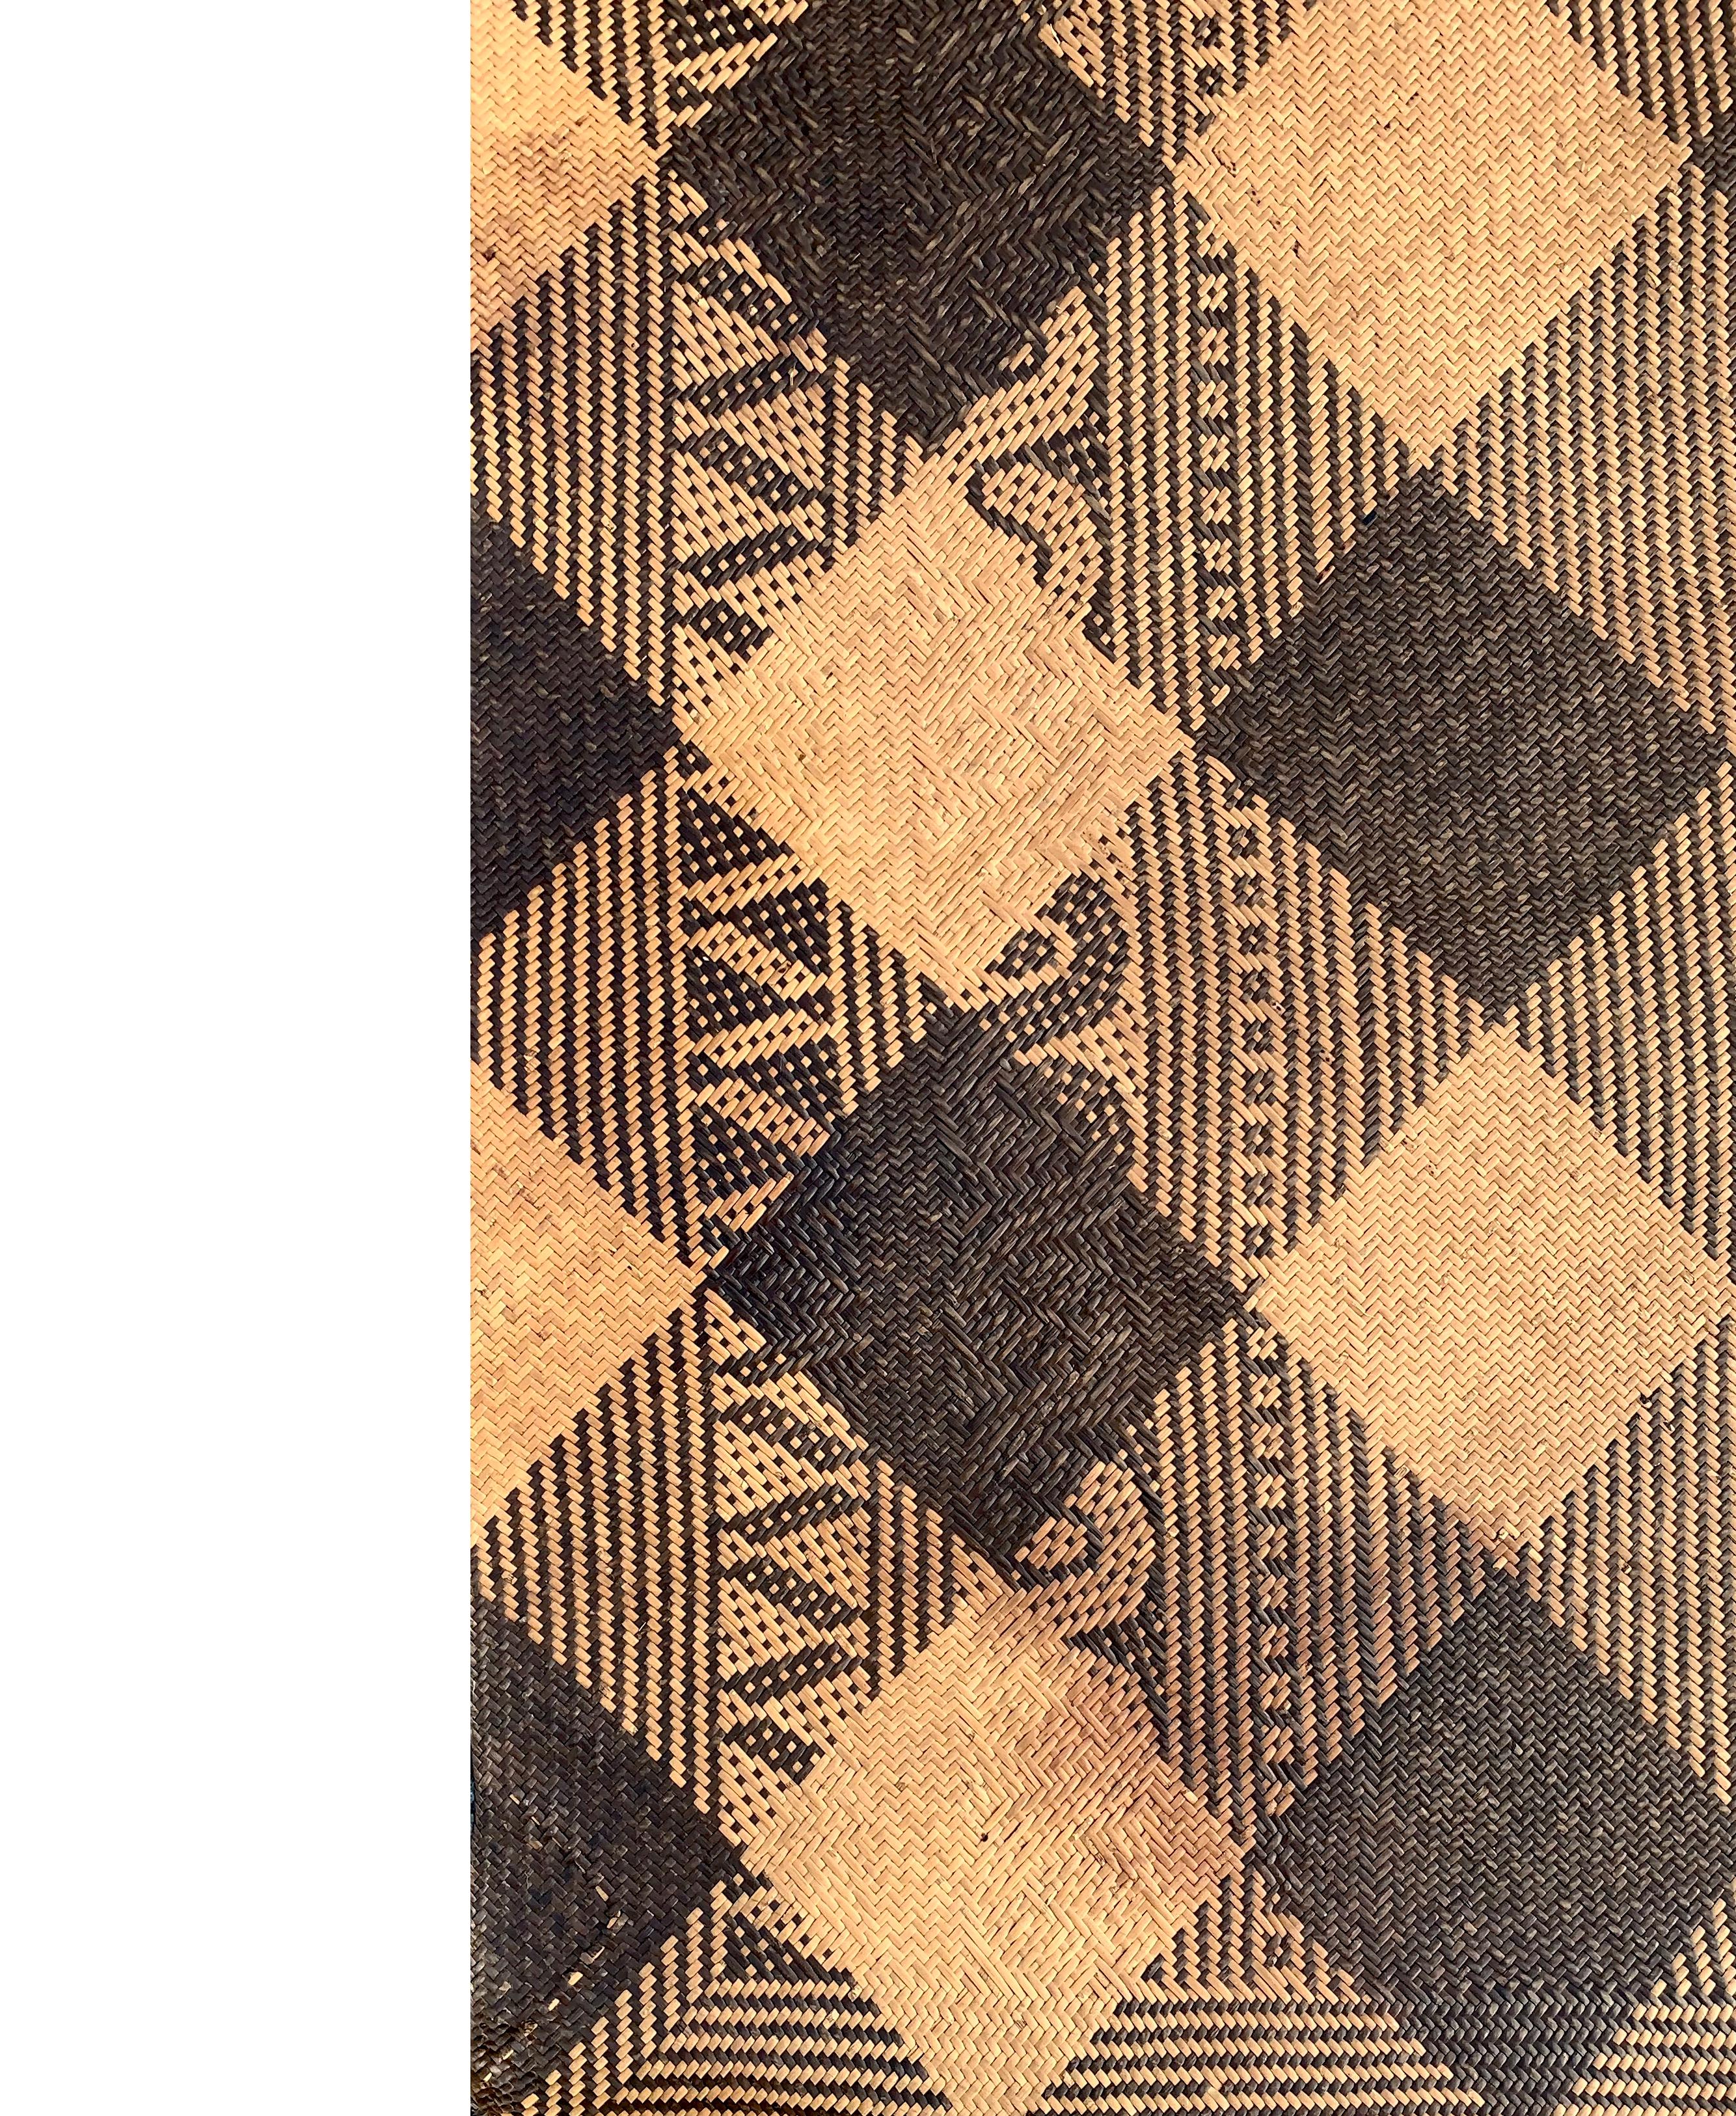 This floor mat once occupied a tribal long house of the Dayak Tribe of Borneo. It is made from woven dyed and natural coloured rattan fibres & features tribal patterns along its border. 

Dimension: Height 220cm x Width 150cm.
 